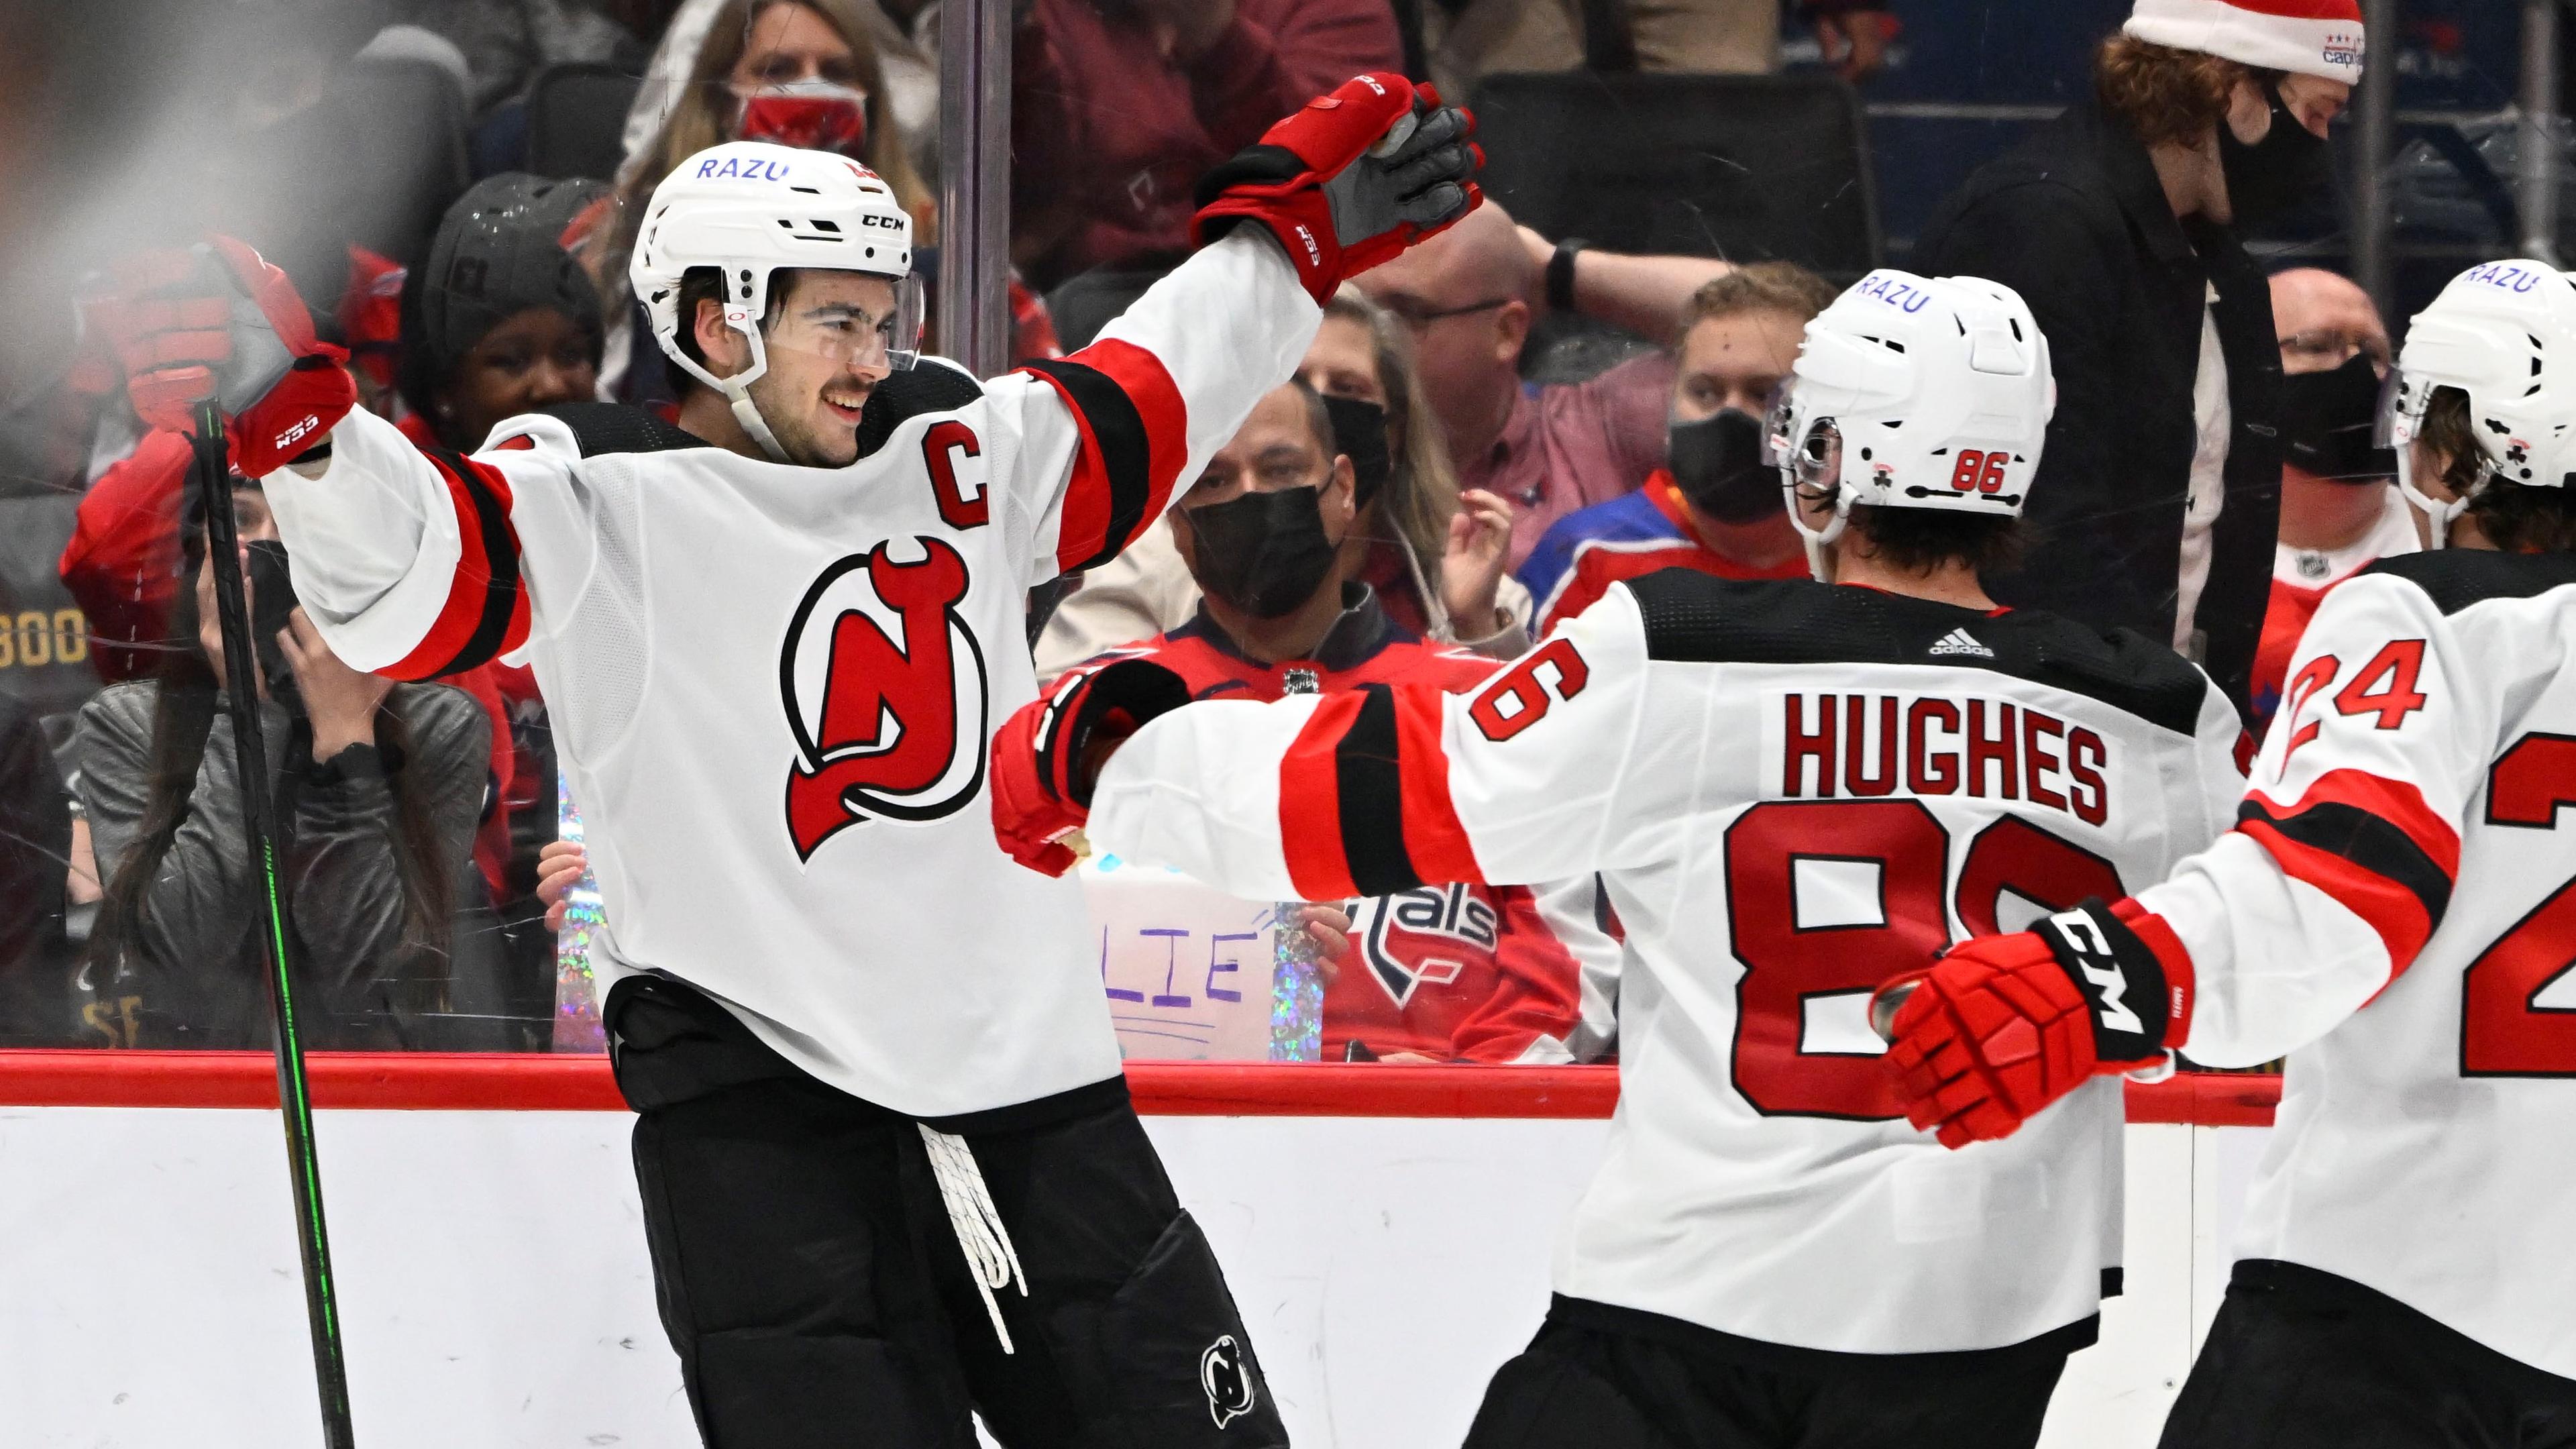 Jan 2, 2022; Washington, District of Columbia, USA; New Jersey Devils center Nico Hischier (13) reacts after scoring the game winning goal against the Washington Capitals during the overtime period at Capital One Arena. Mandatory Credit: Brad Mills-USA TODAY Sports / Brad Mills-USA TODAY Sports